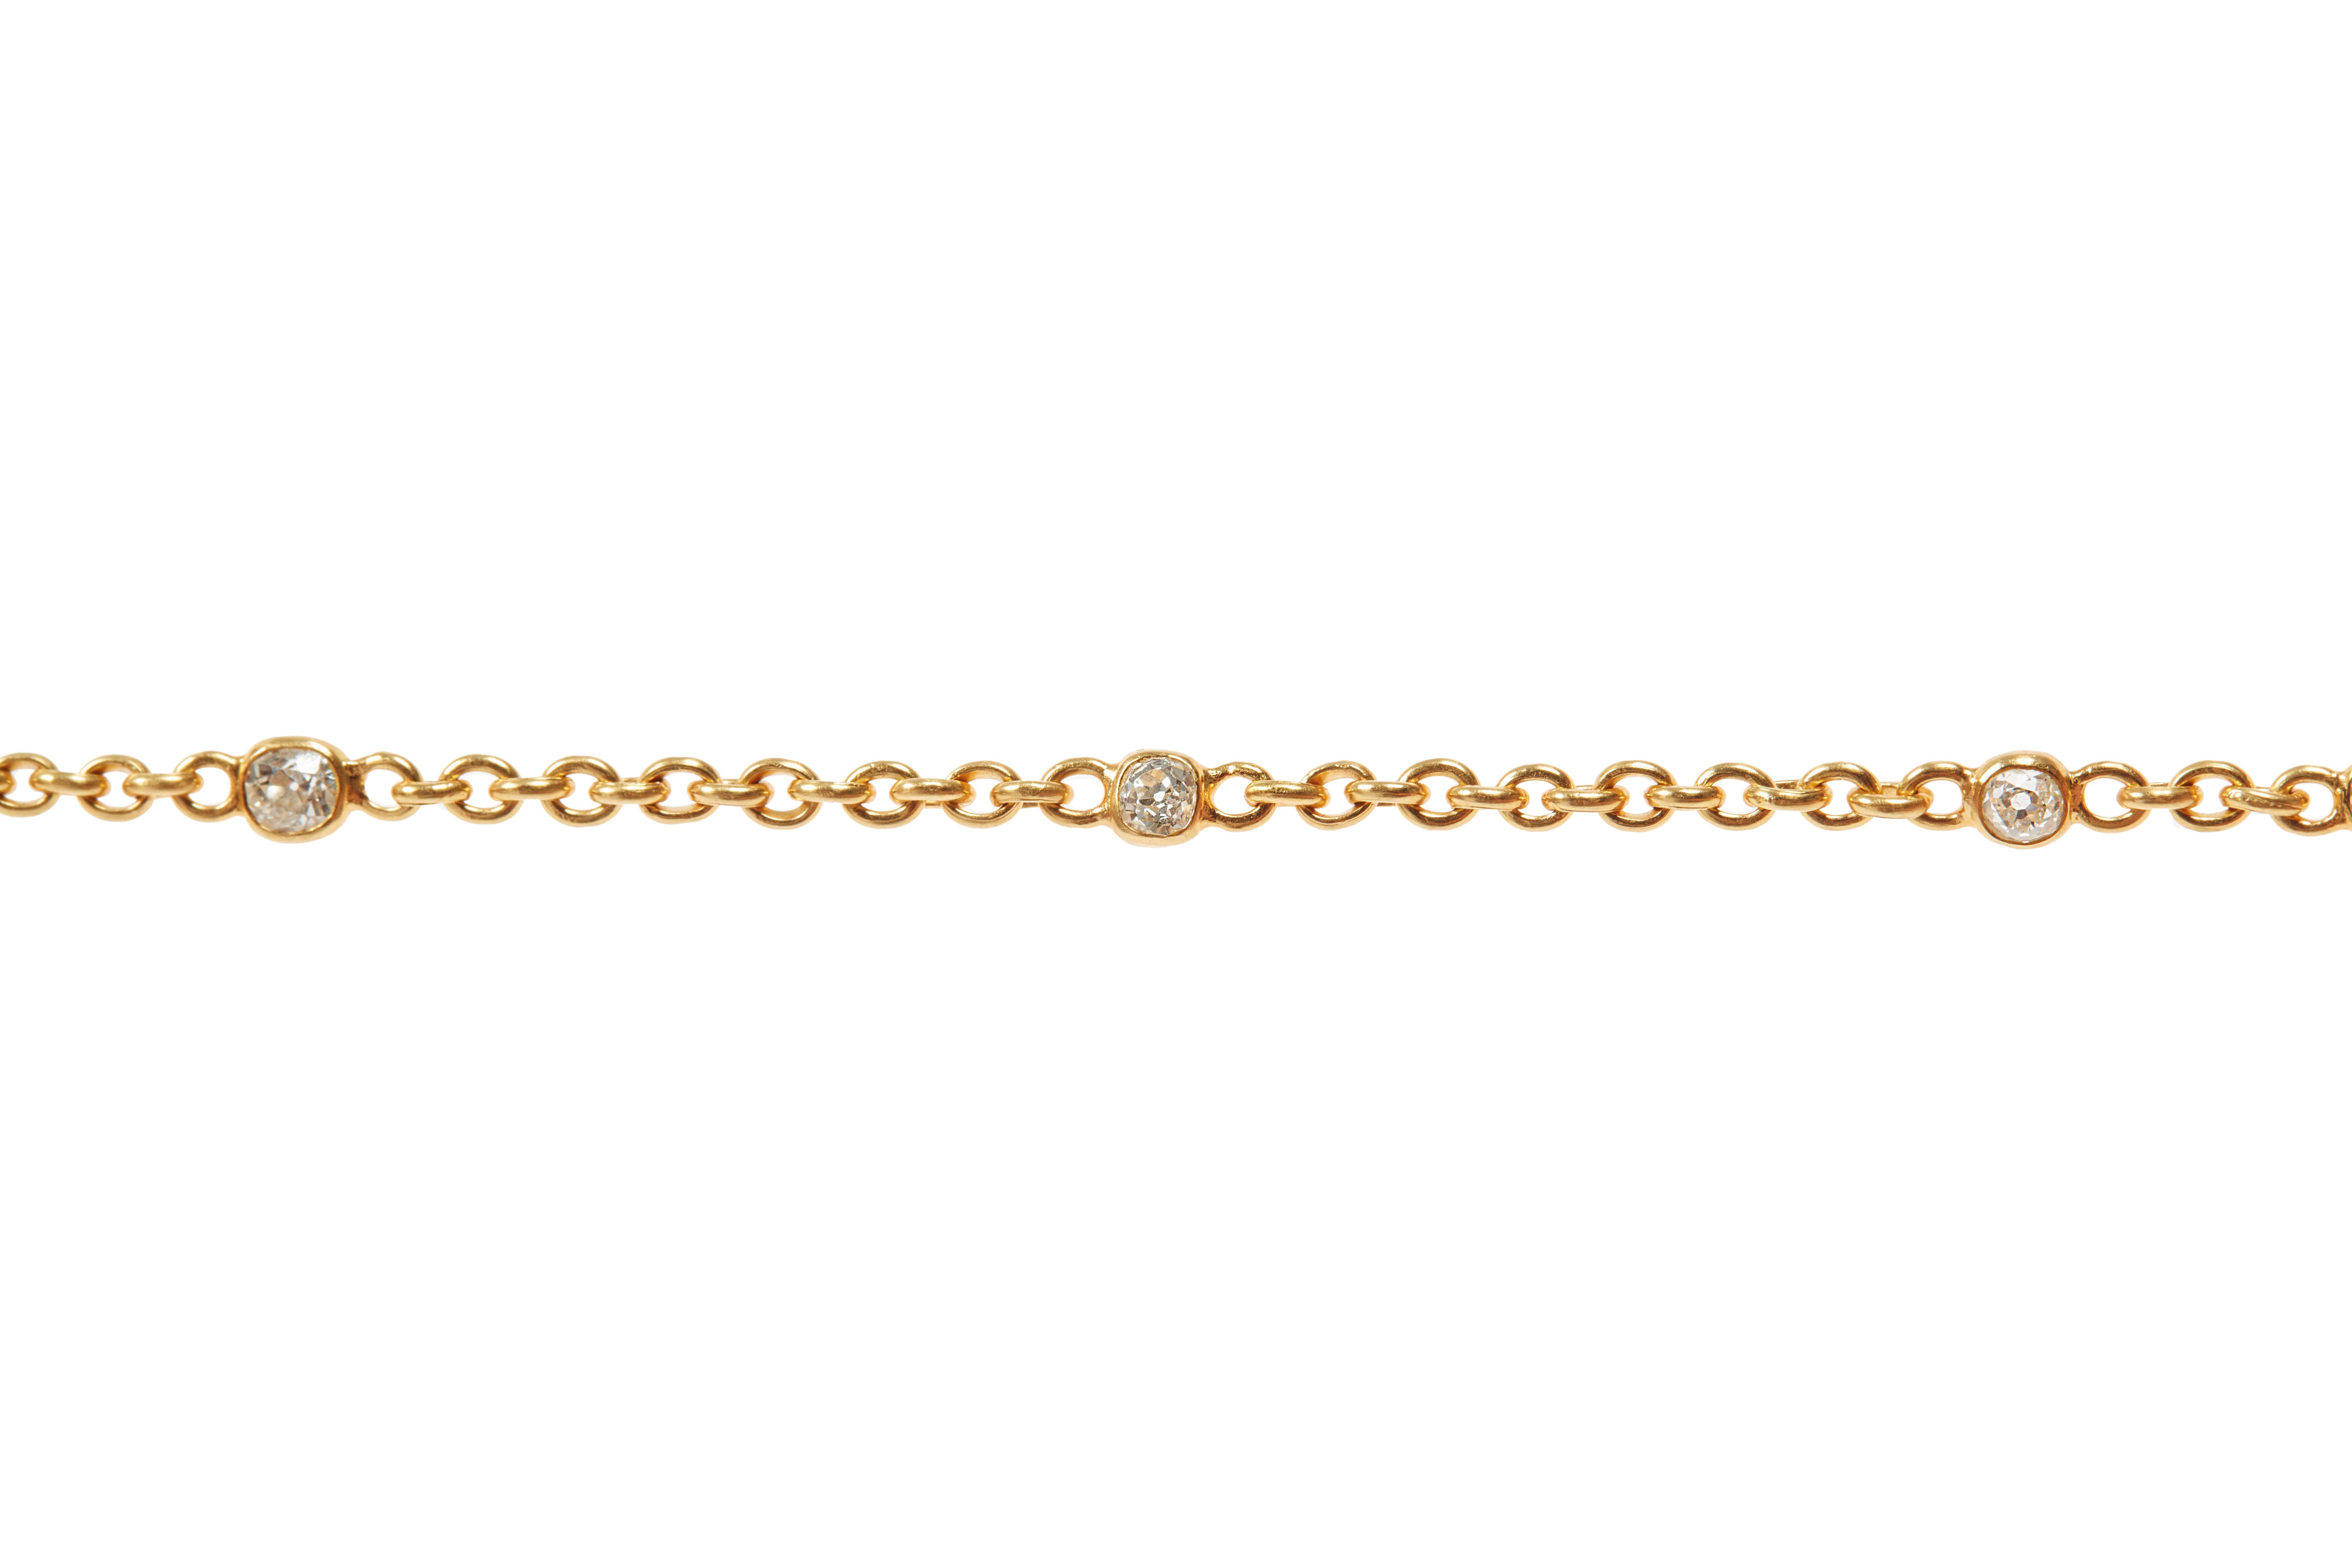 Darius Jewels Diamond Fairy Chain is crafted entirely by hand and includes the designer's signature clasp featuring a double lock closure. 

18K Yellow Gold
2.21cts Antique Old Mine Cut Diamonds
17